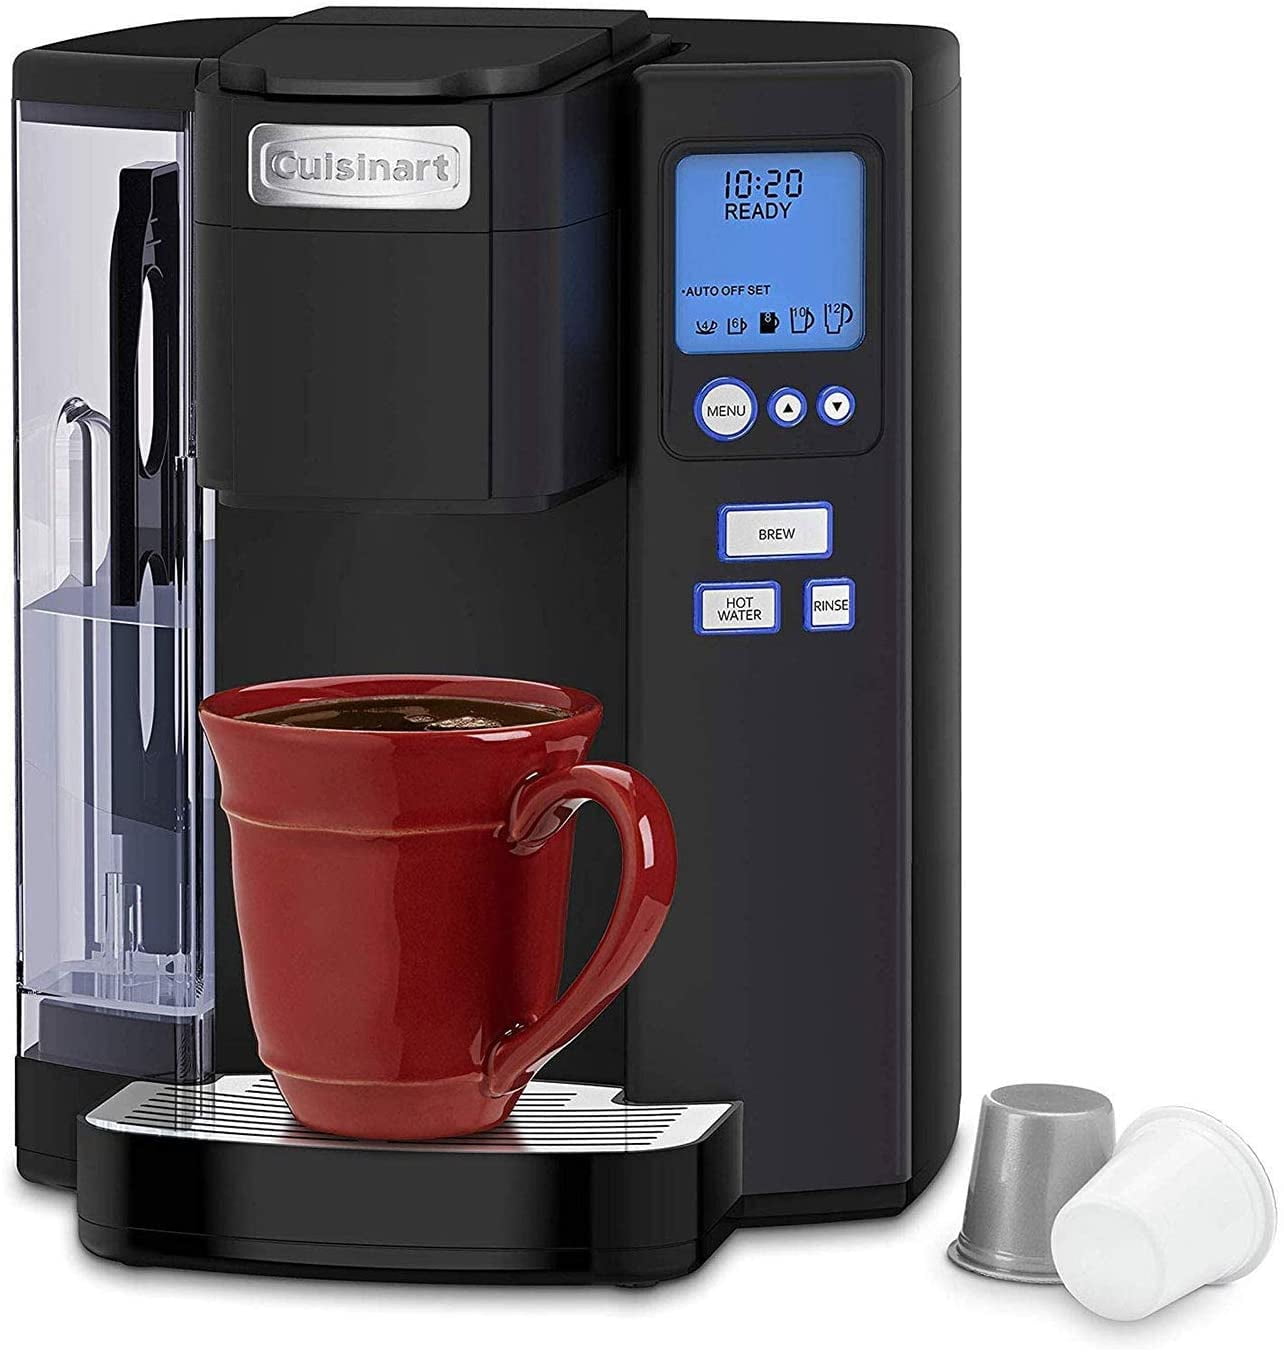  Cuisinart SS-10P1 Single Serve Coffee Maker with Built-in  Frother, Hot and Iced Coffee Options Bundle with 96-count Arabica coffee  blend, 12-count Colombian Roast K-Cup, and Steel Tumbler (4 Items): Home 